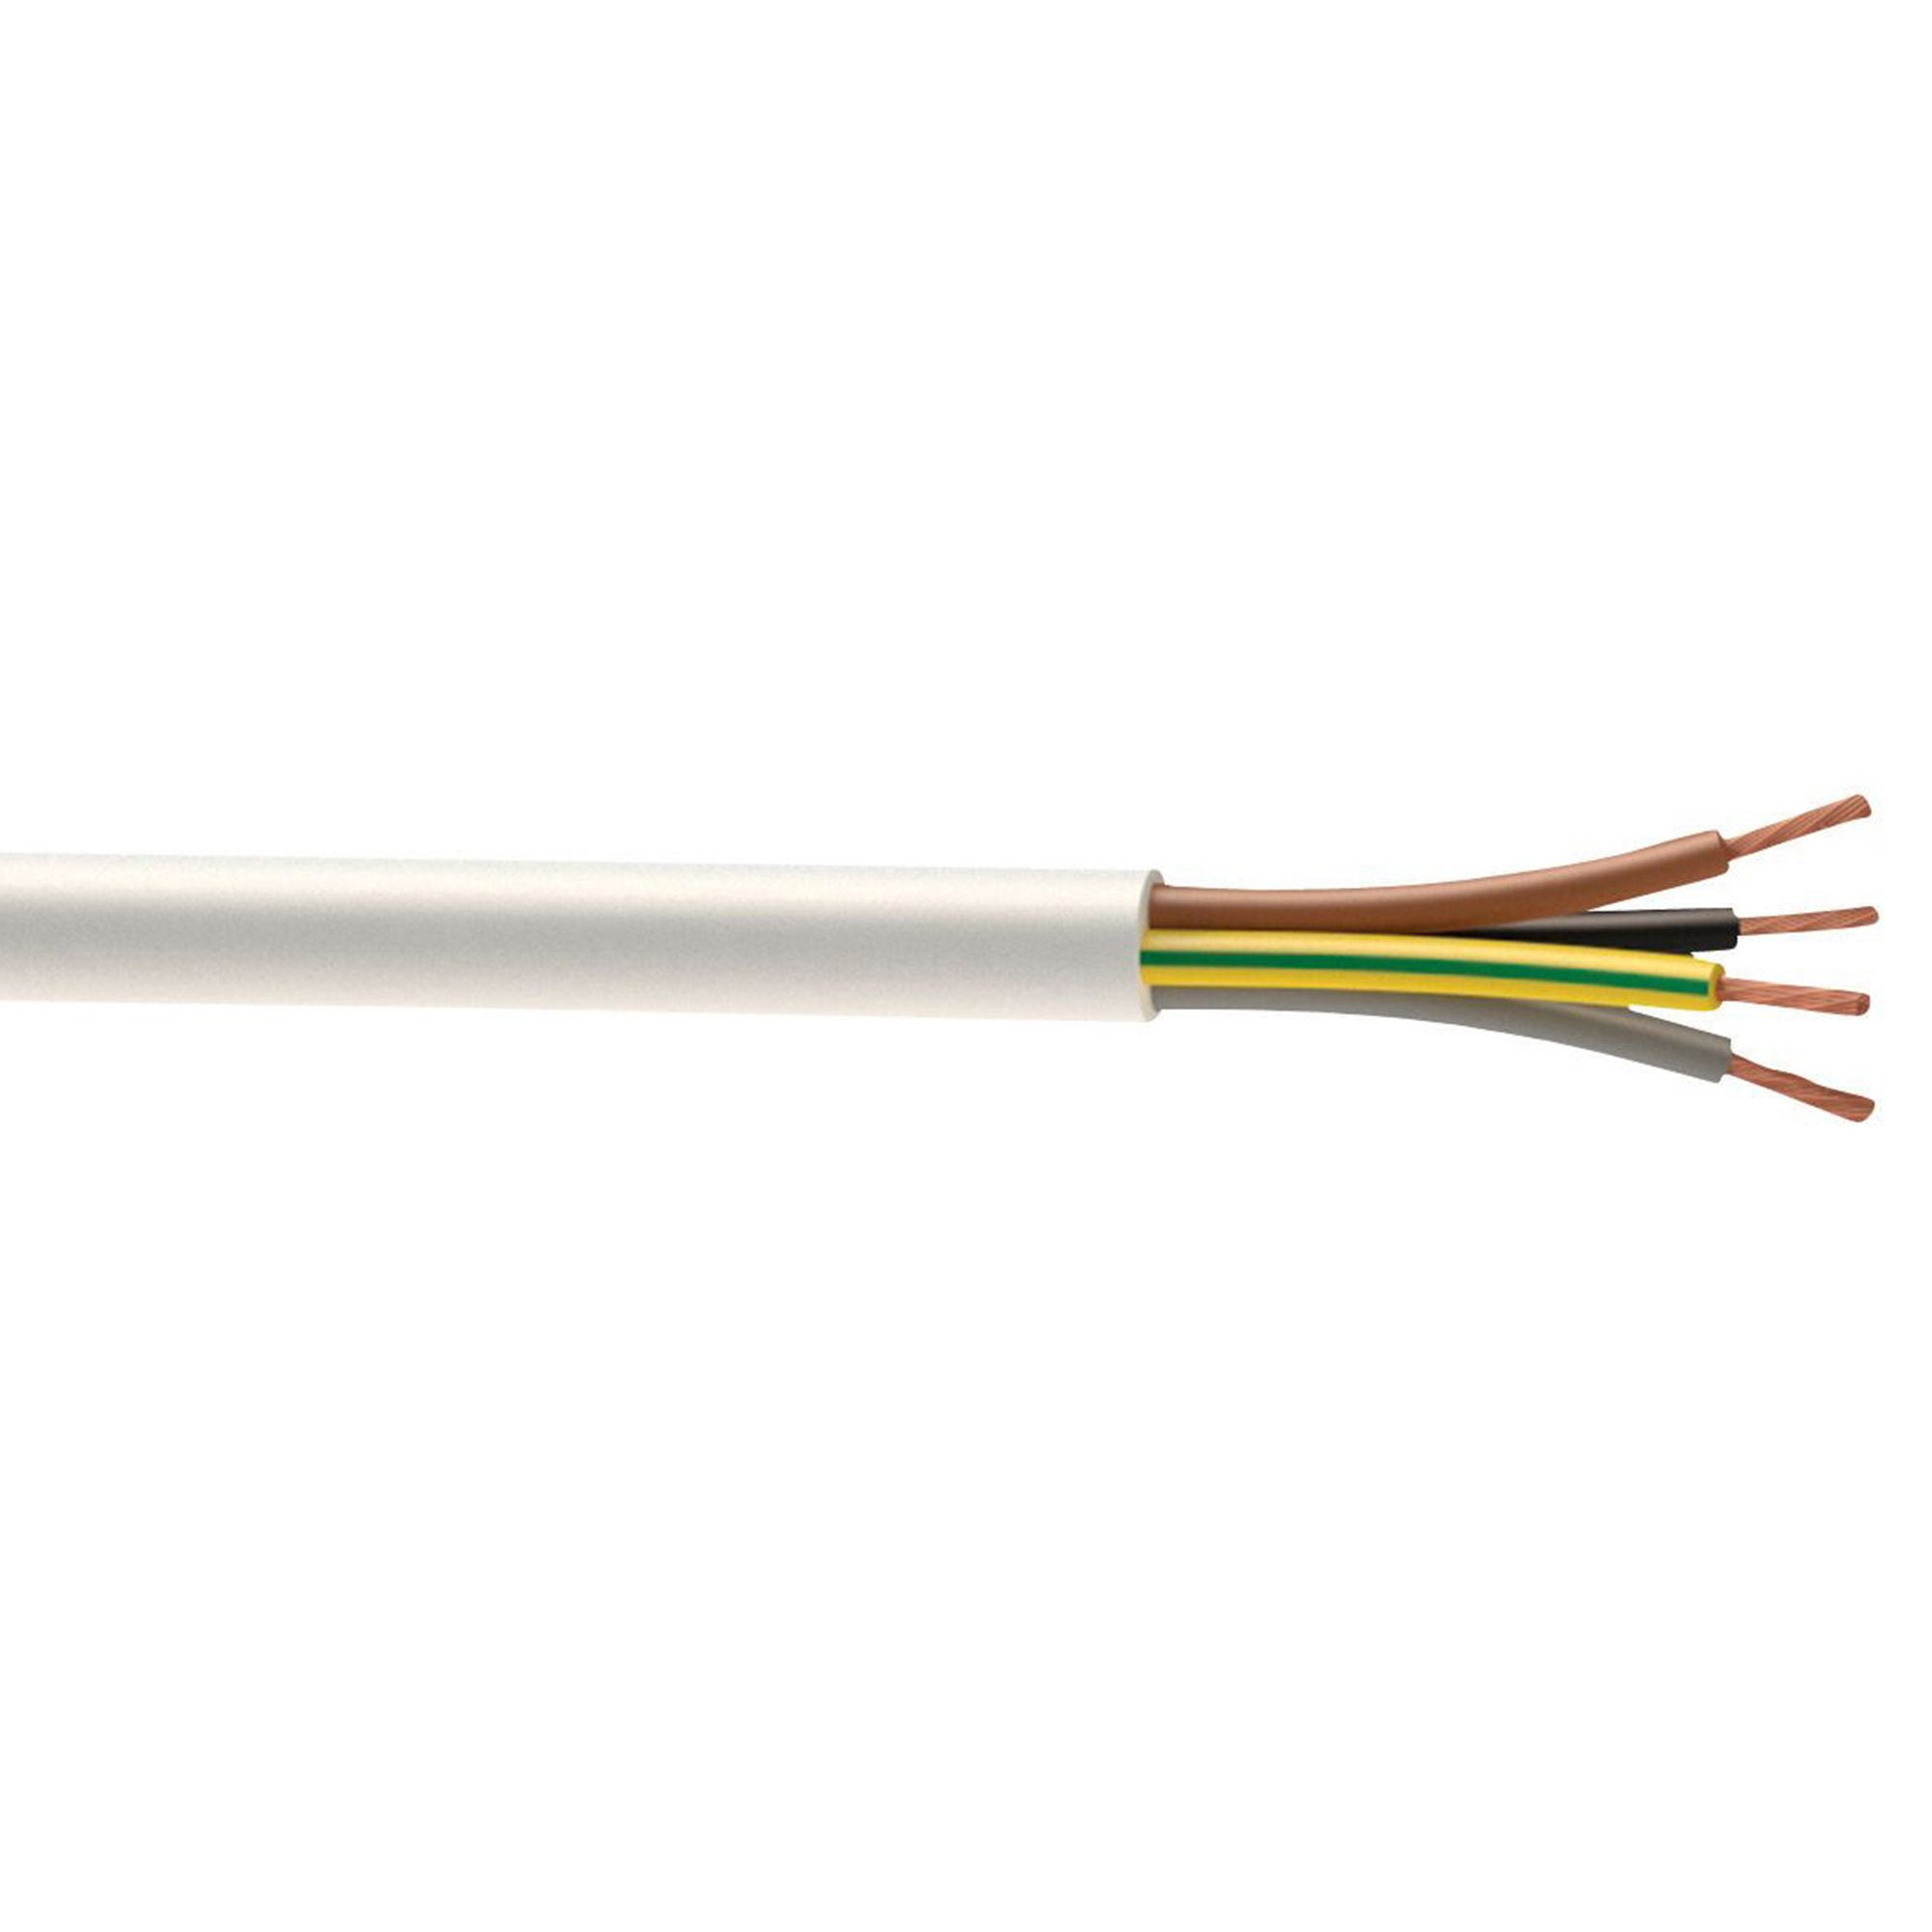 Time 3184Y White 4-core Multi-core cable 1mm² x 5m